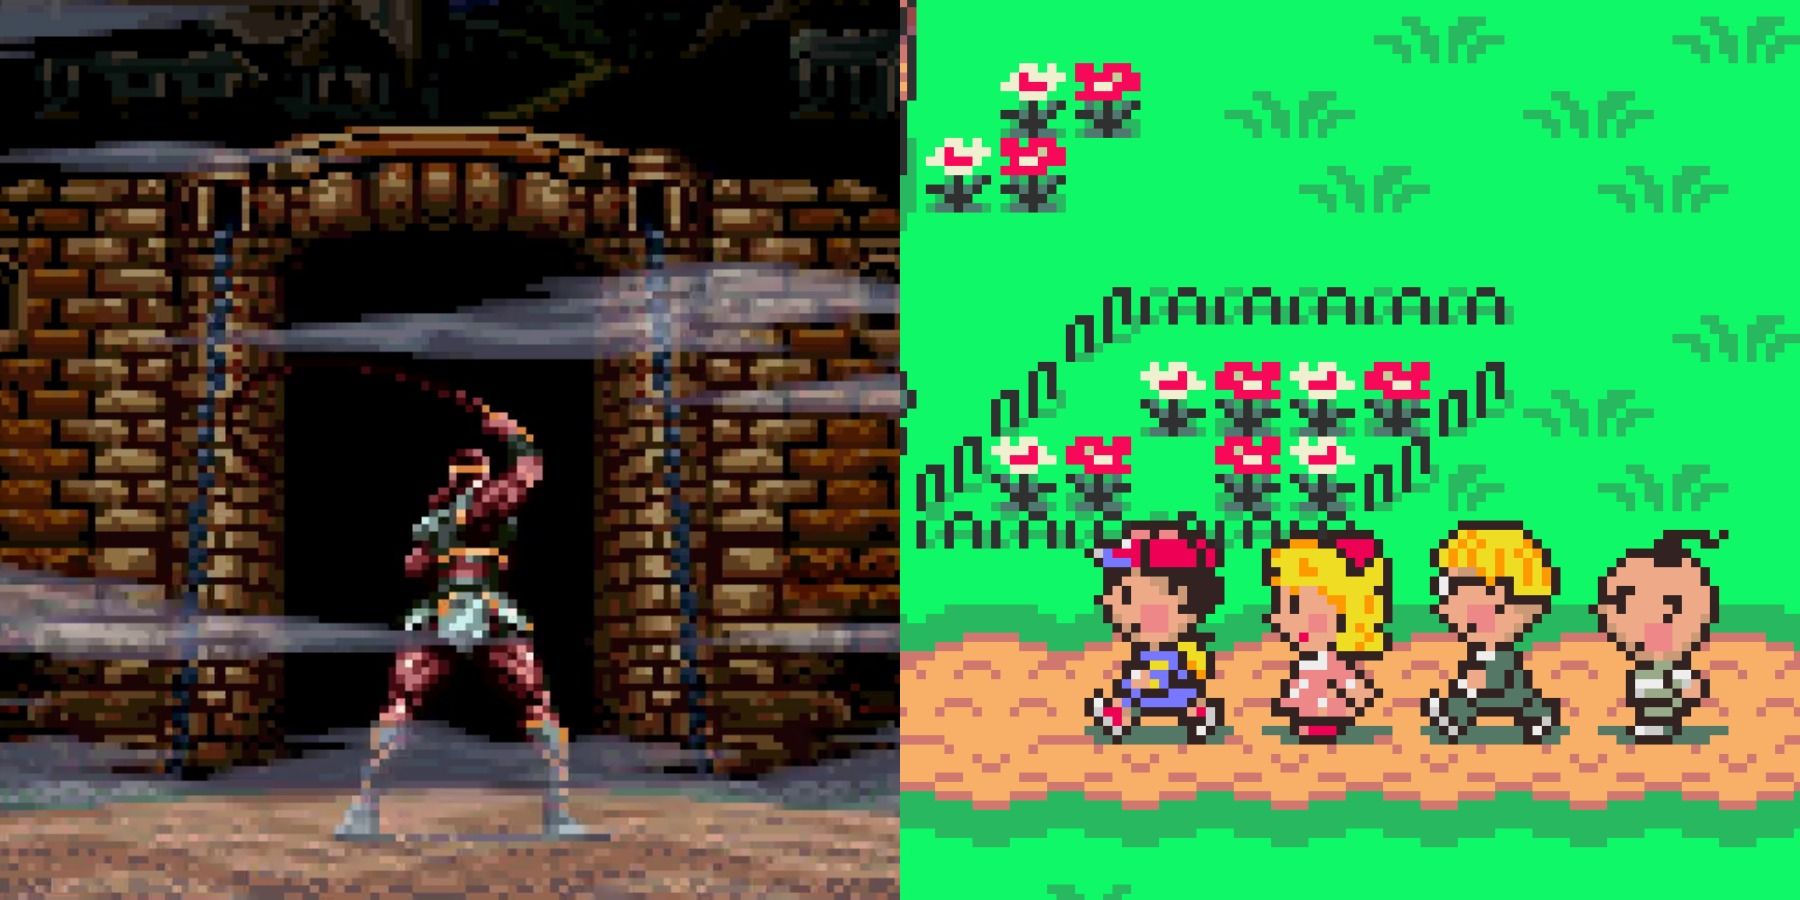 Split image of Simon Belmont entering Dracula's castle in Super Castlevania IV and Ness with his friends in Earthbound